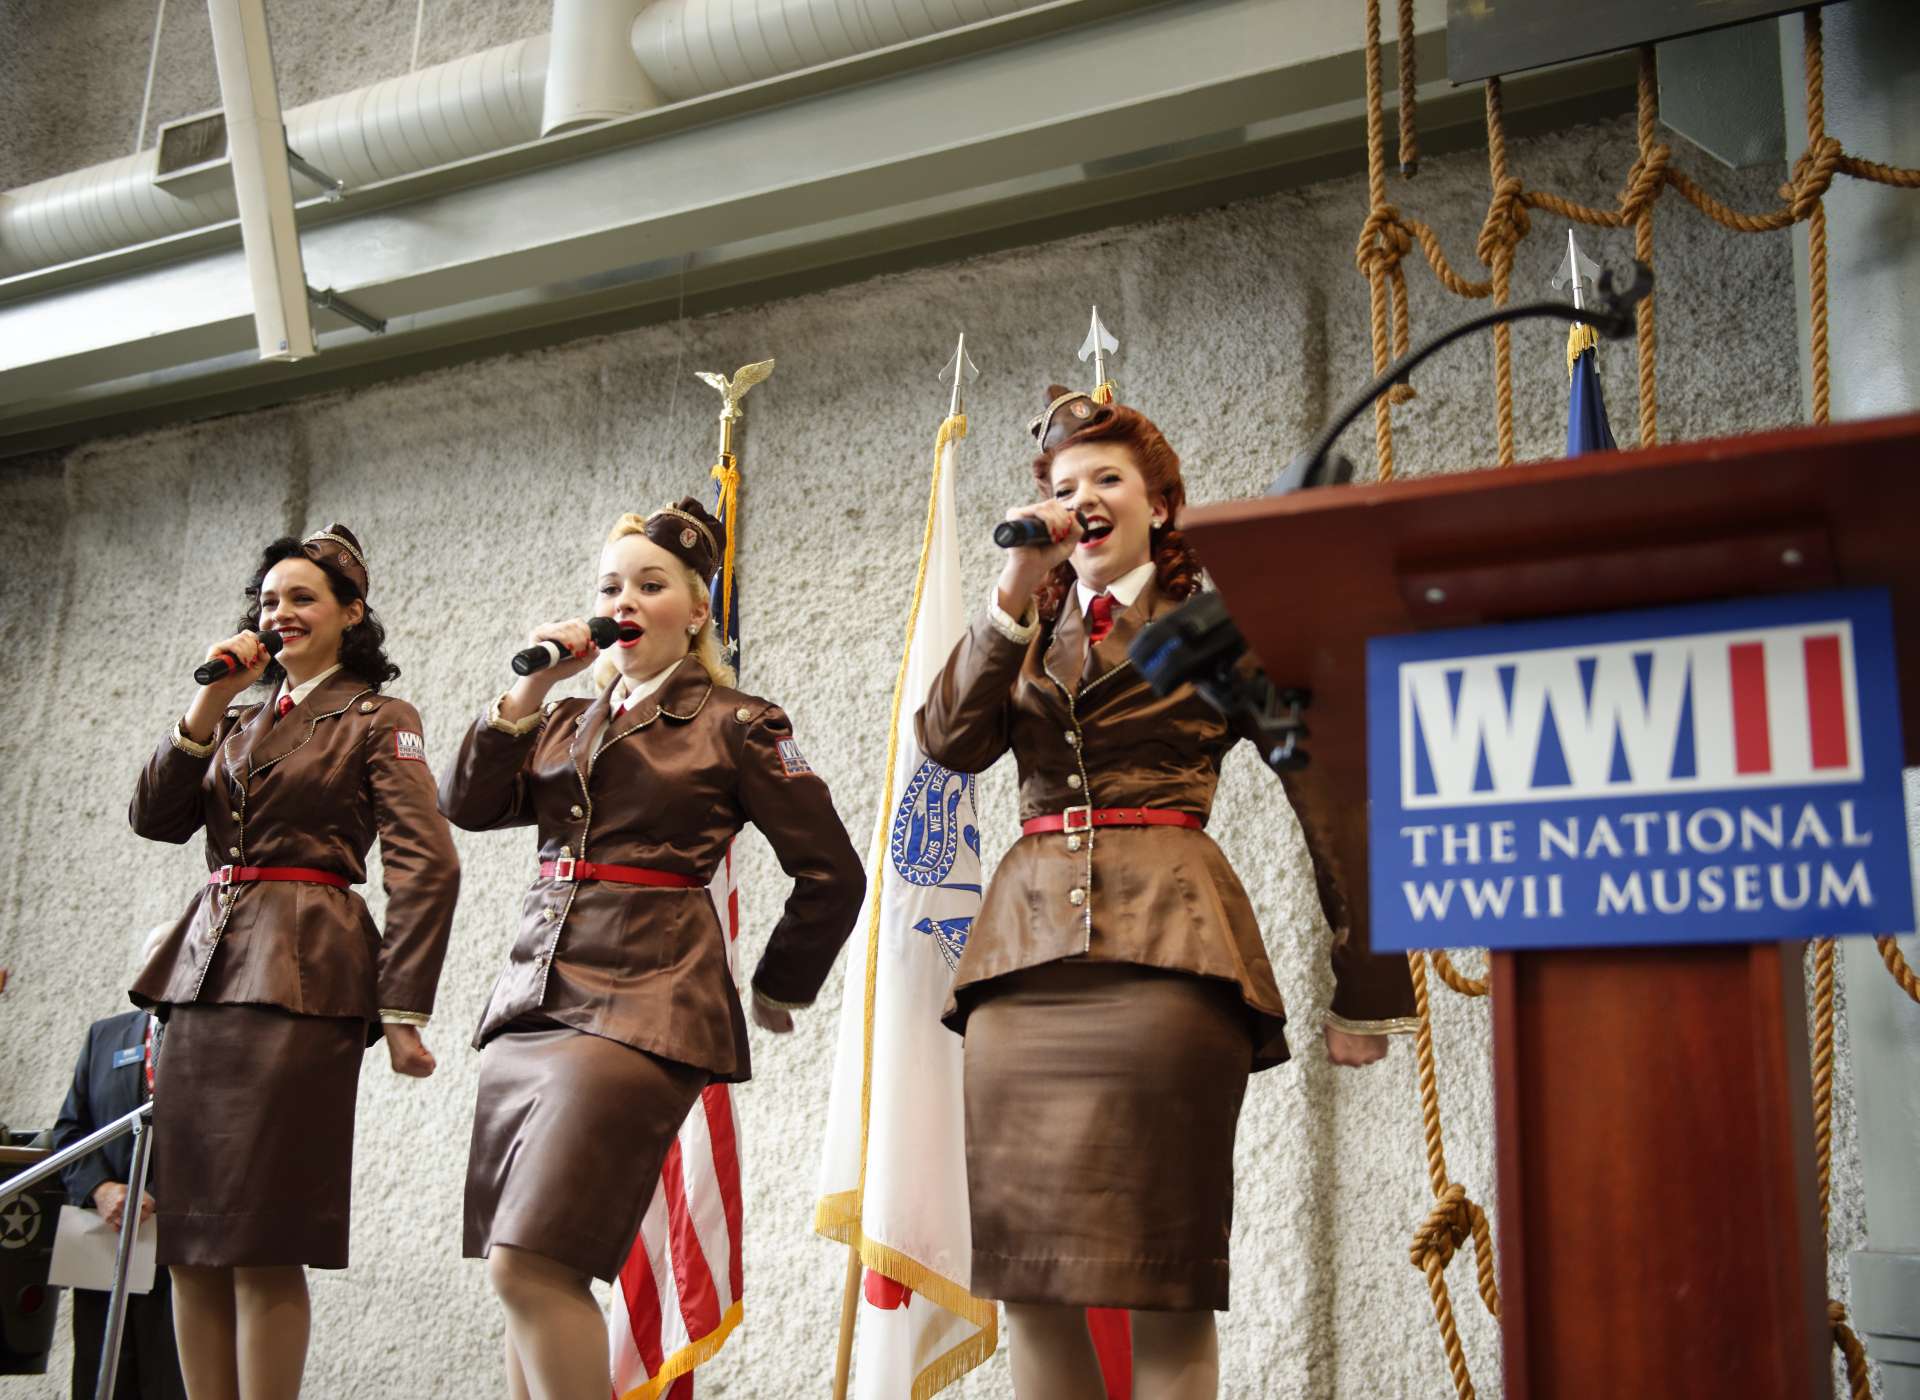 The Victory Belles perform for a military reunion